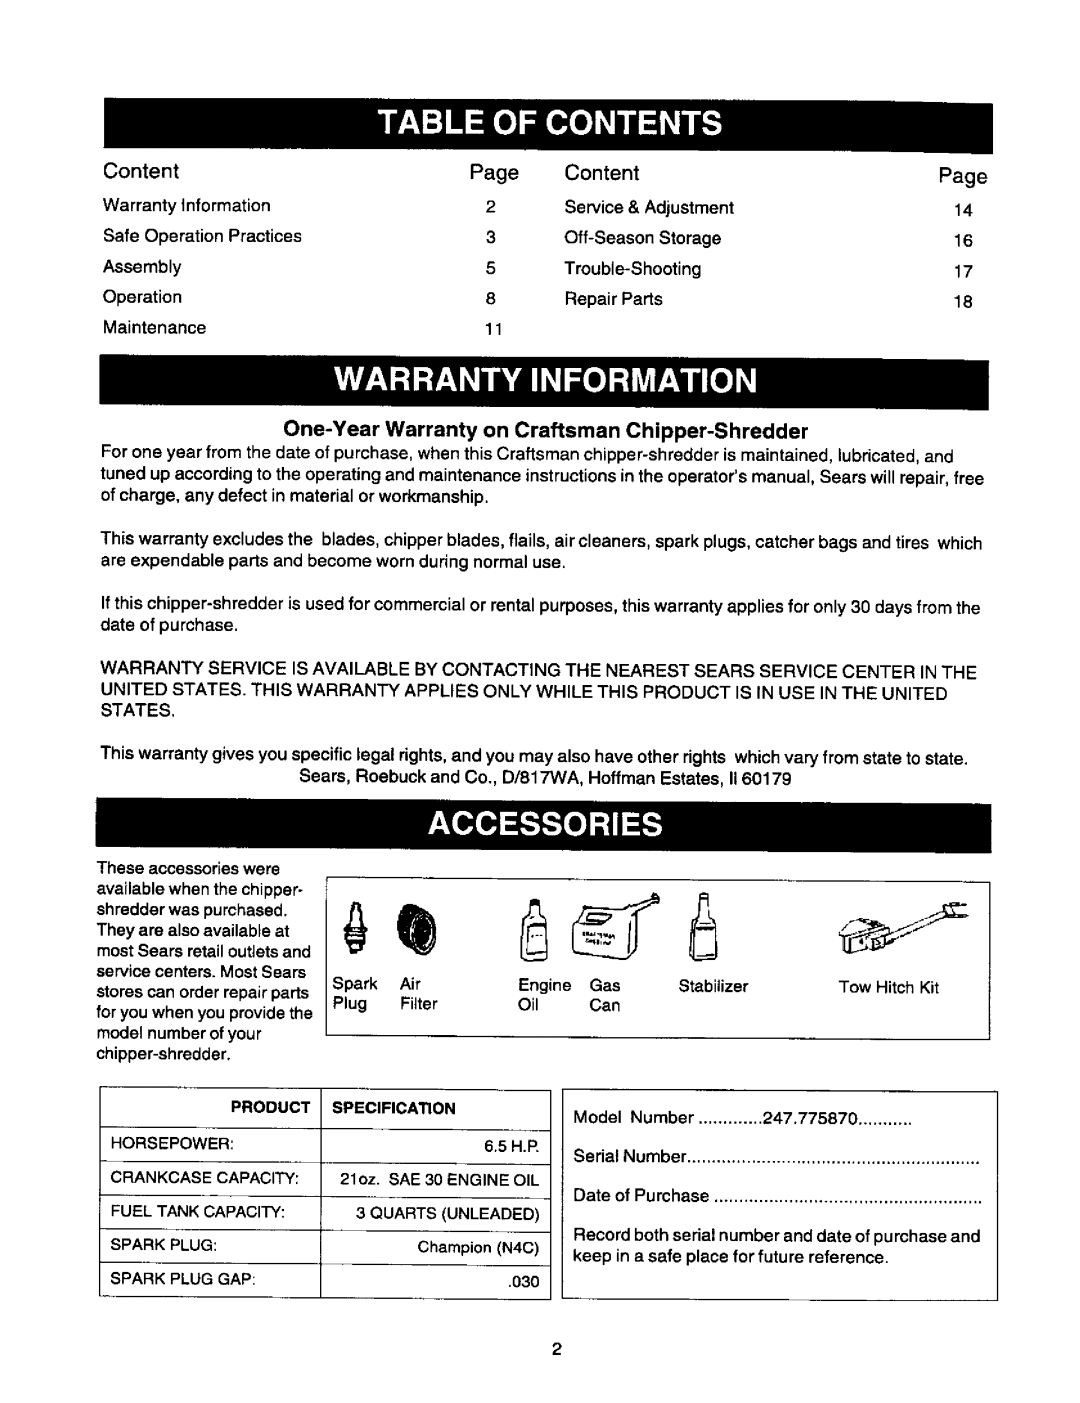 Craftsman 247.775870 owner manual One-YearWarranty on Craftsman Chipper-Shredder, Page, Content 